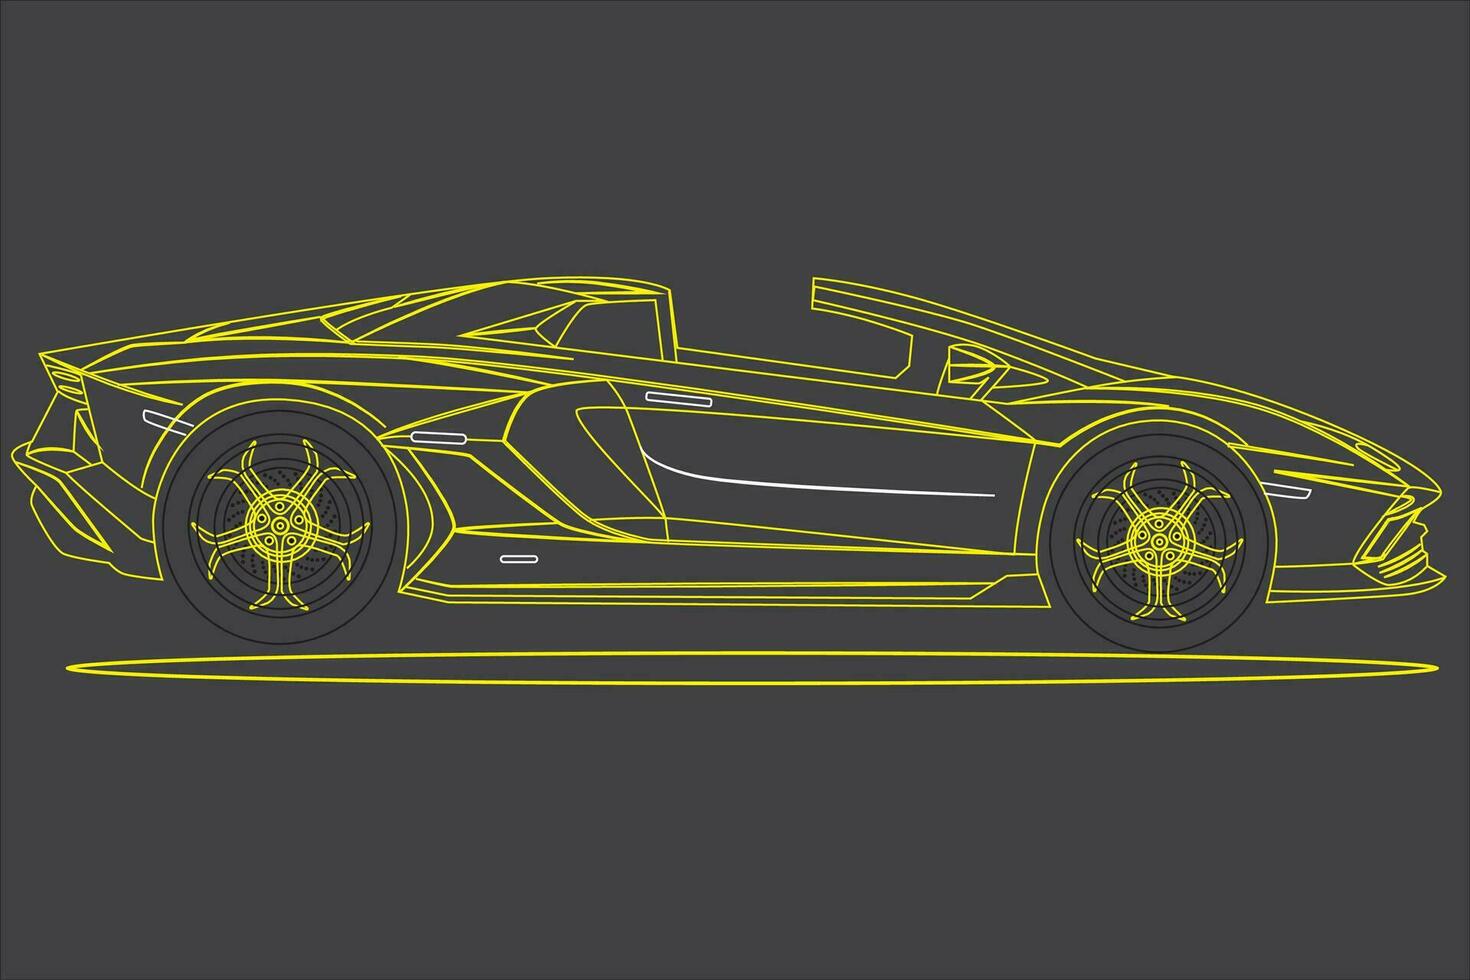 Sports car silhouette isolated on white background. Sports car side view. Yellow line art design template. Vector illustration.